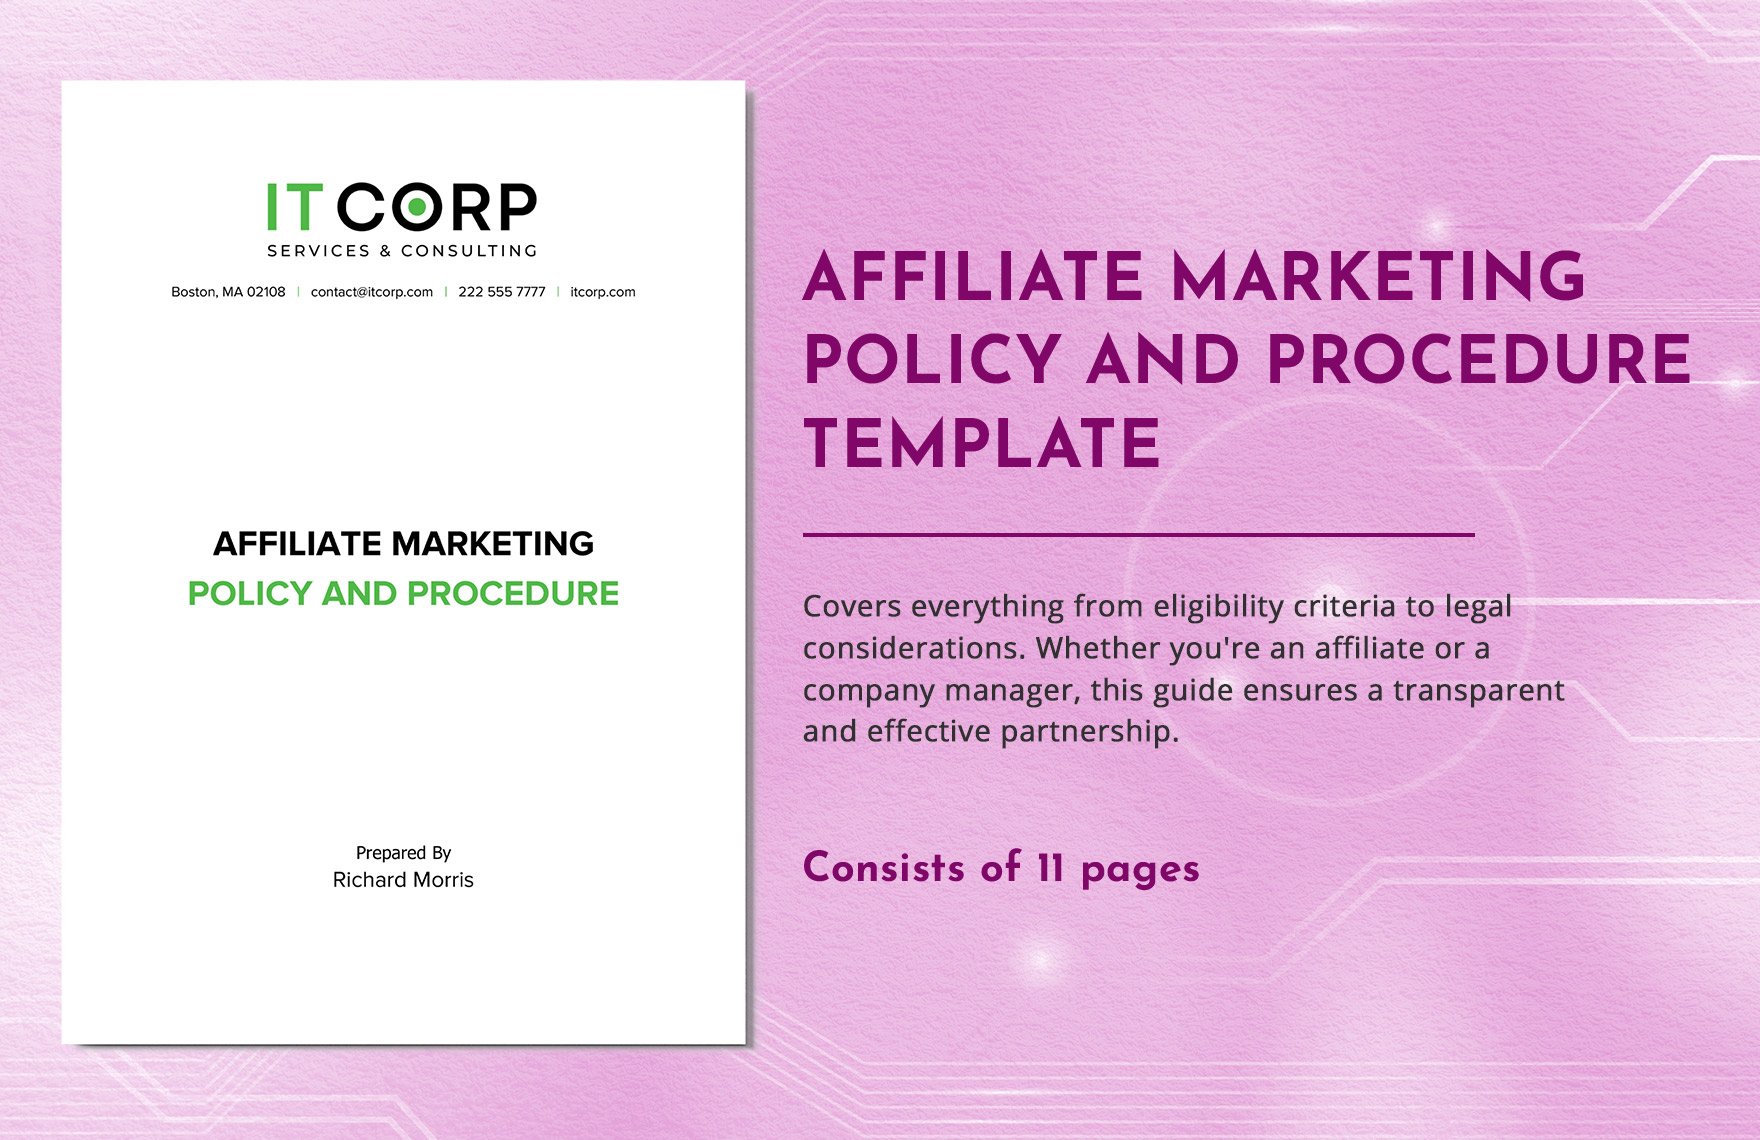 Affiliate Marketing Policy and Procedure Template